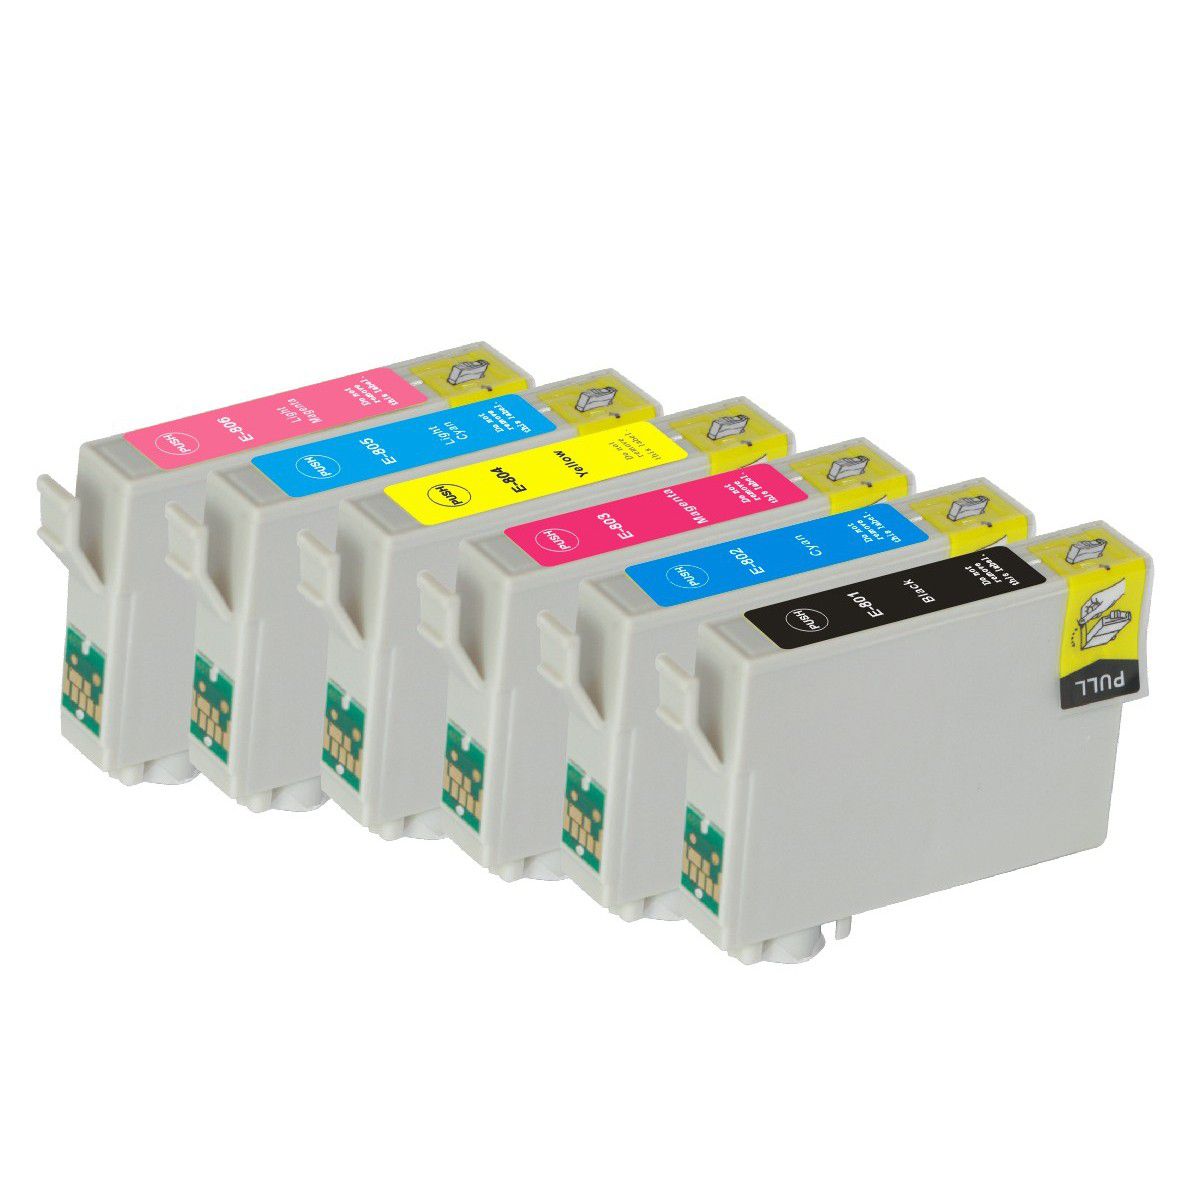 Compatible ink cartridge for Epson T0801-6